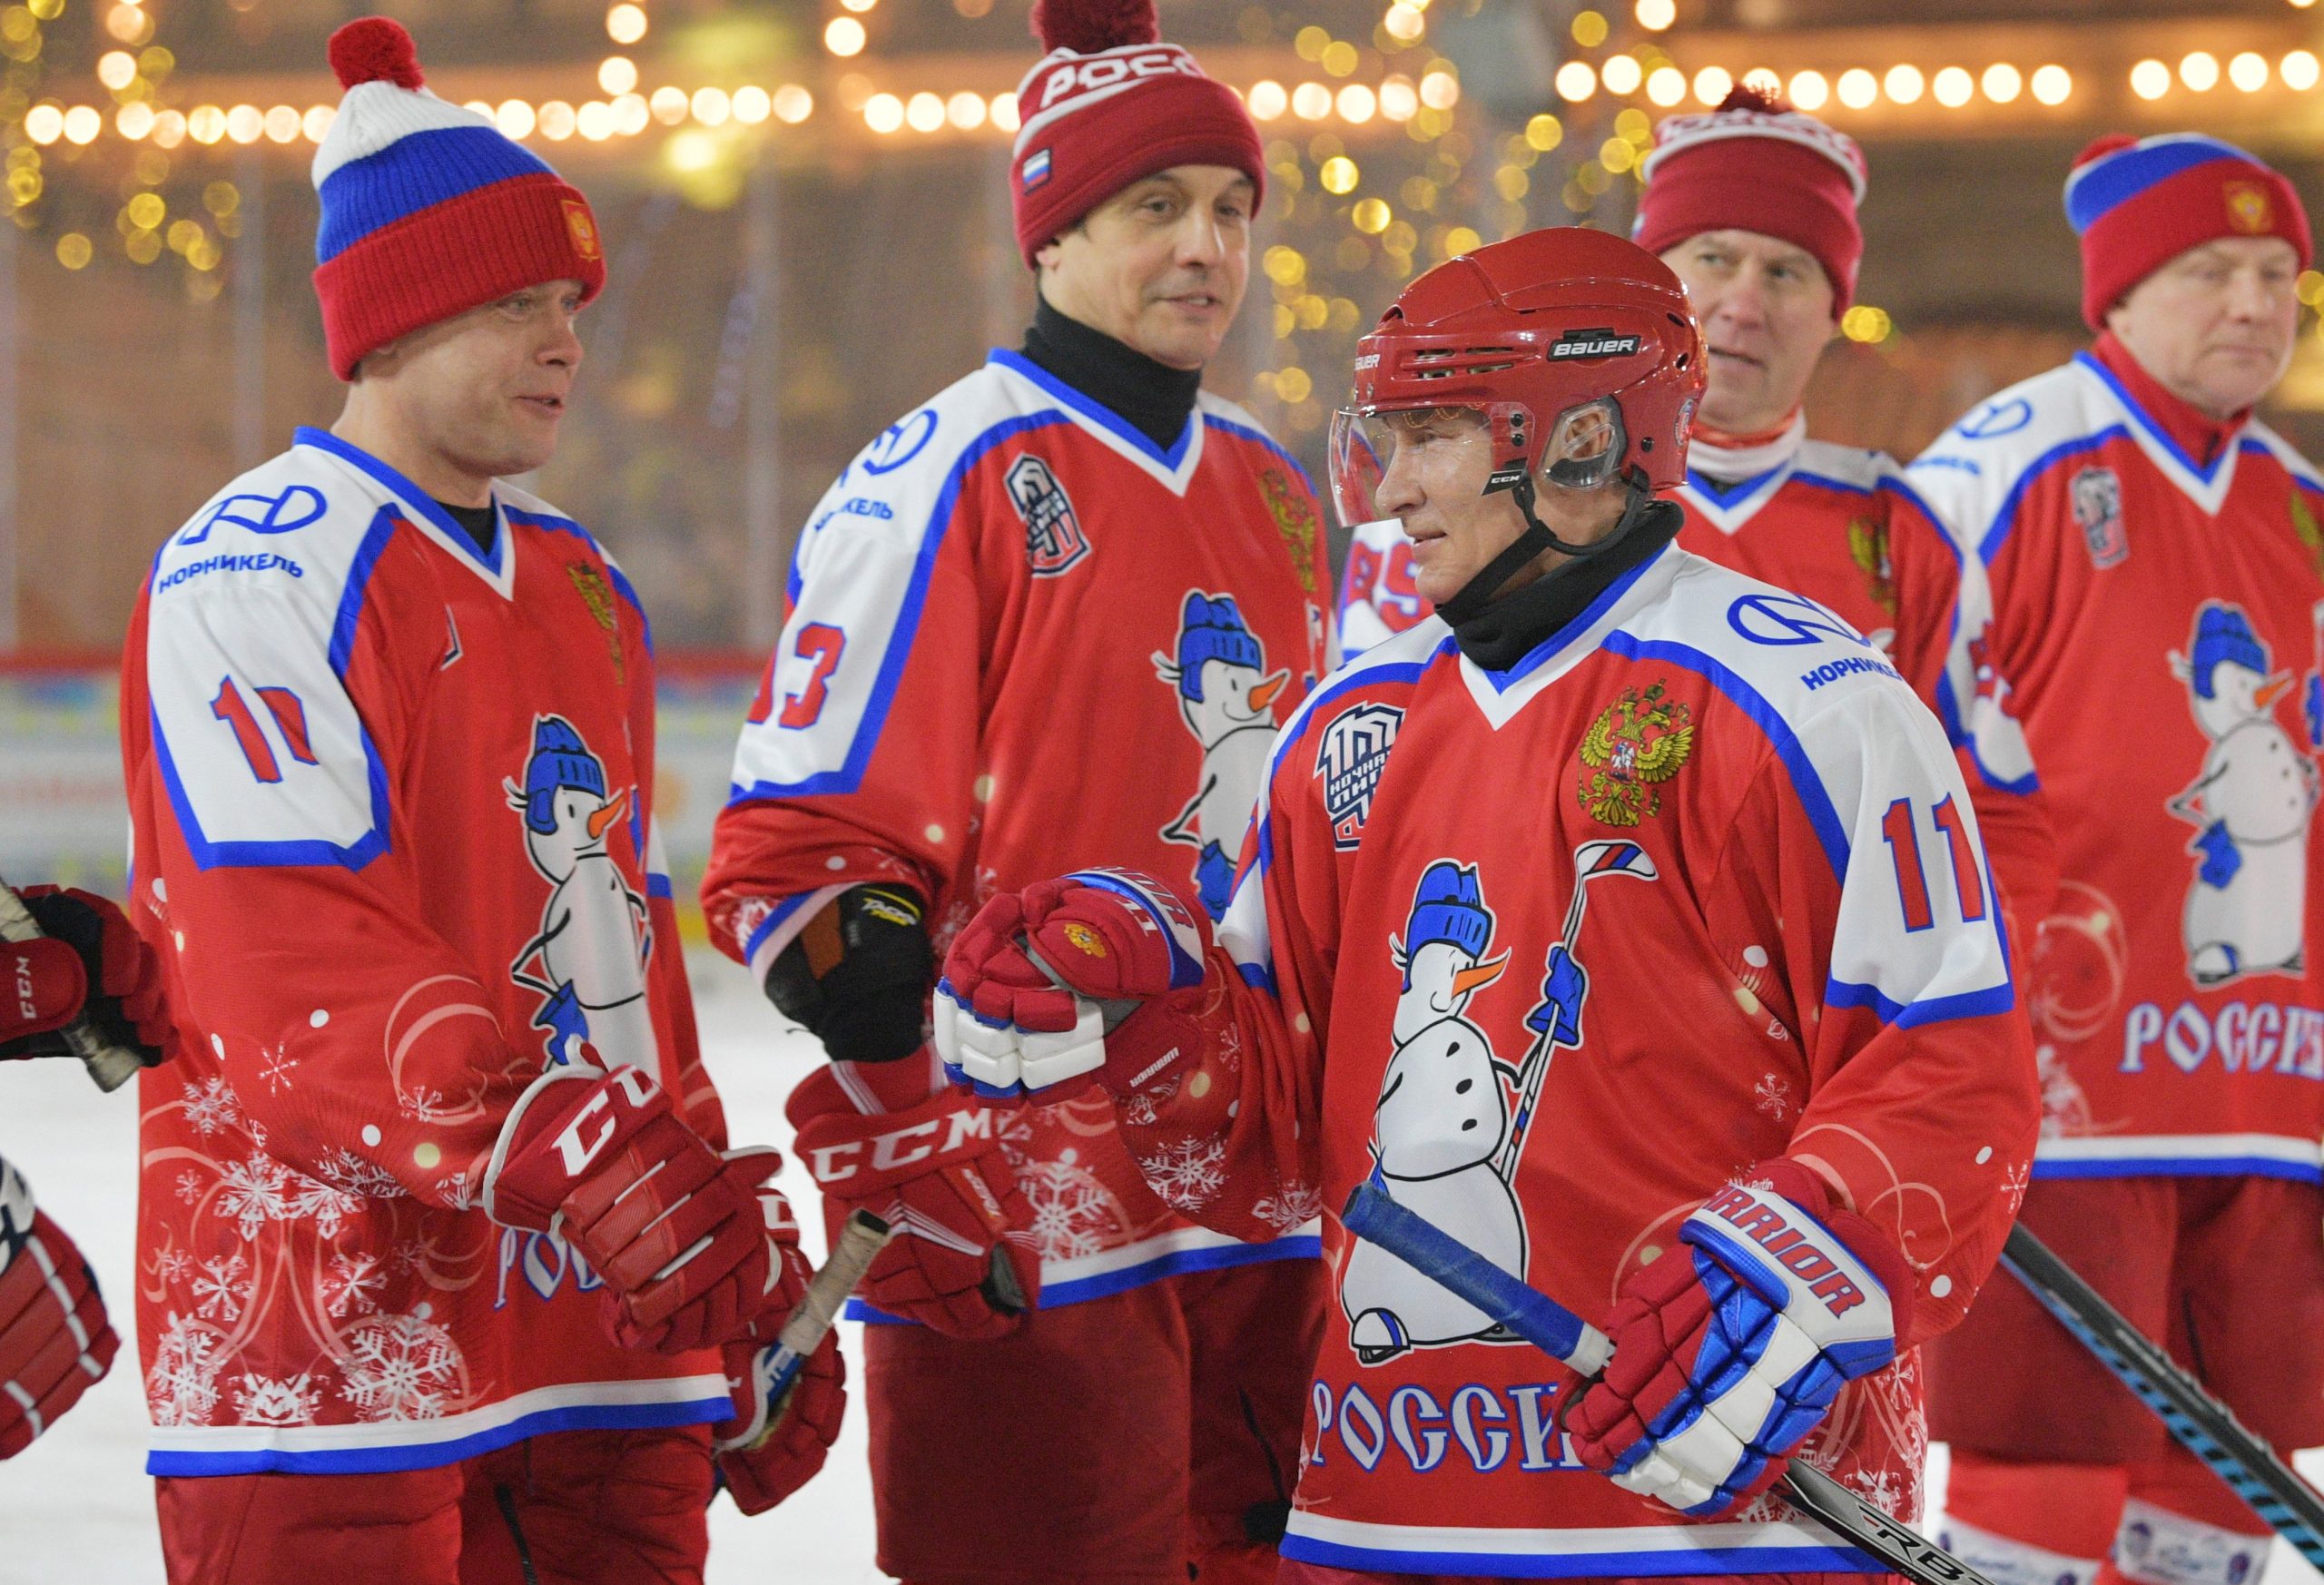 epa08090934 Russian President Vladimir Putin (C) greets participants of a Night Hockey League friendly match at the ice rink in the Red Square in Moscow, Russia, 25 December 2019.  EPA/ALEXEI DRUZHININ / KREMLIN POOL / SPUTNIK MANDATORY CREDIT